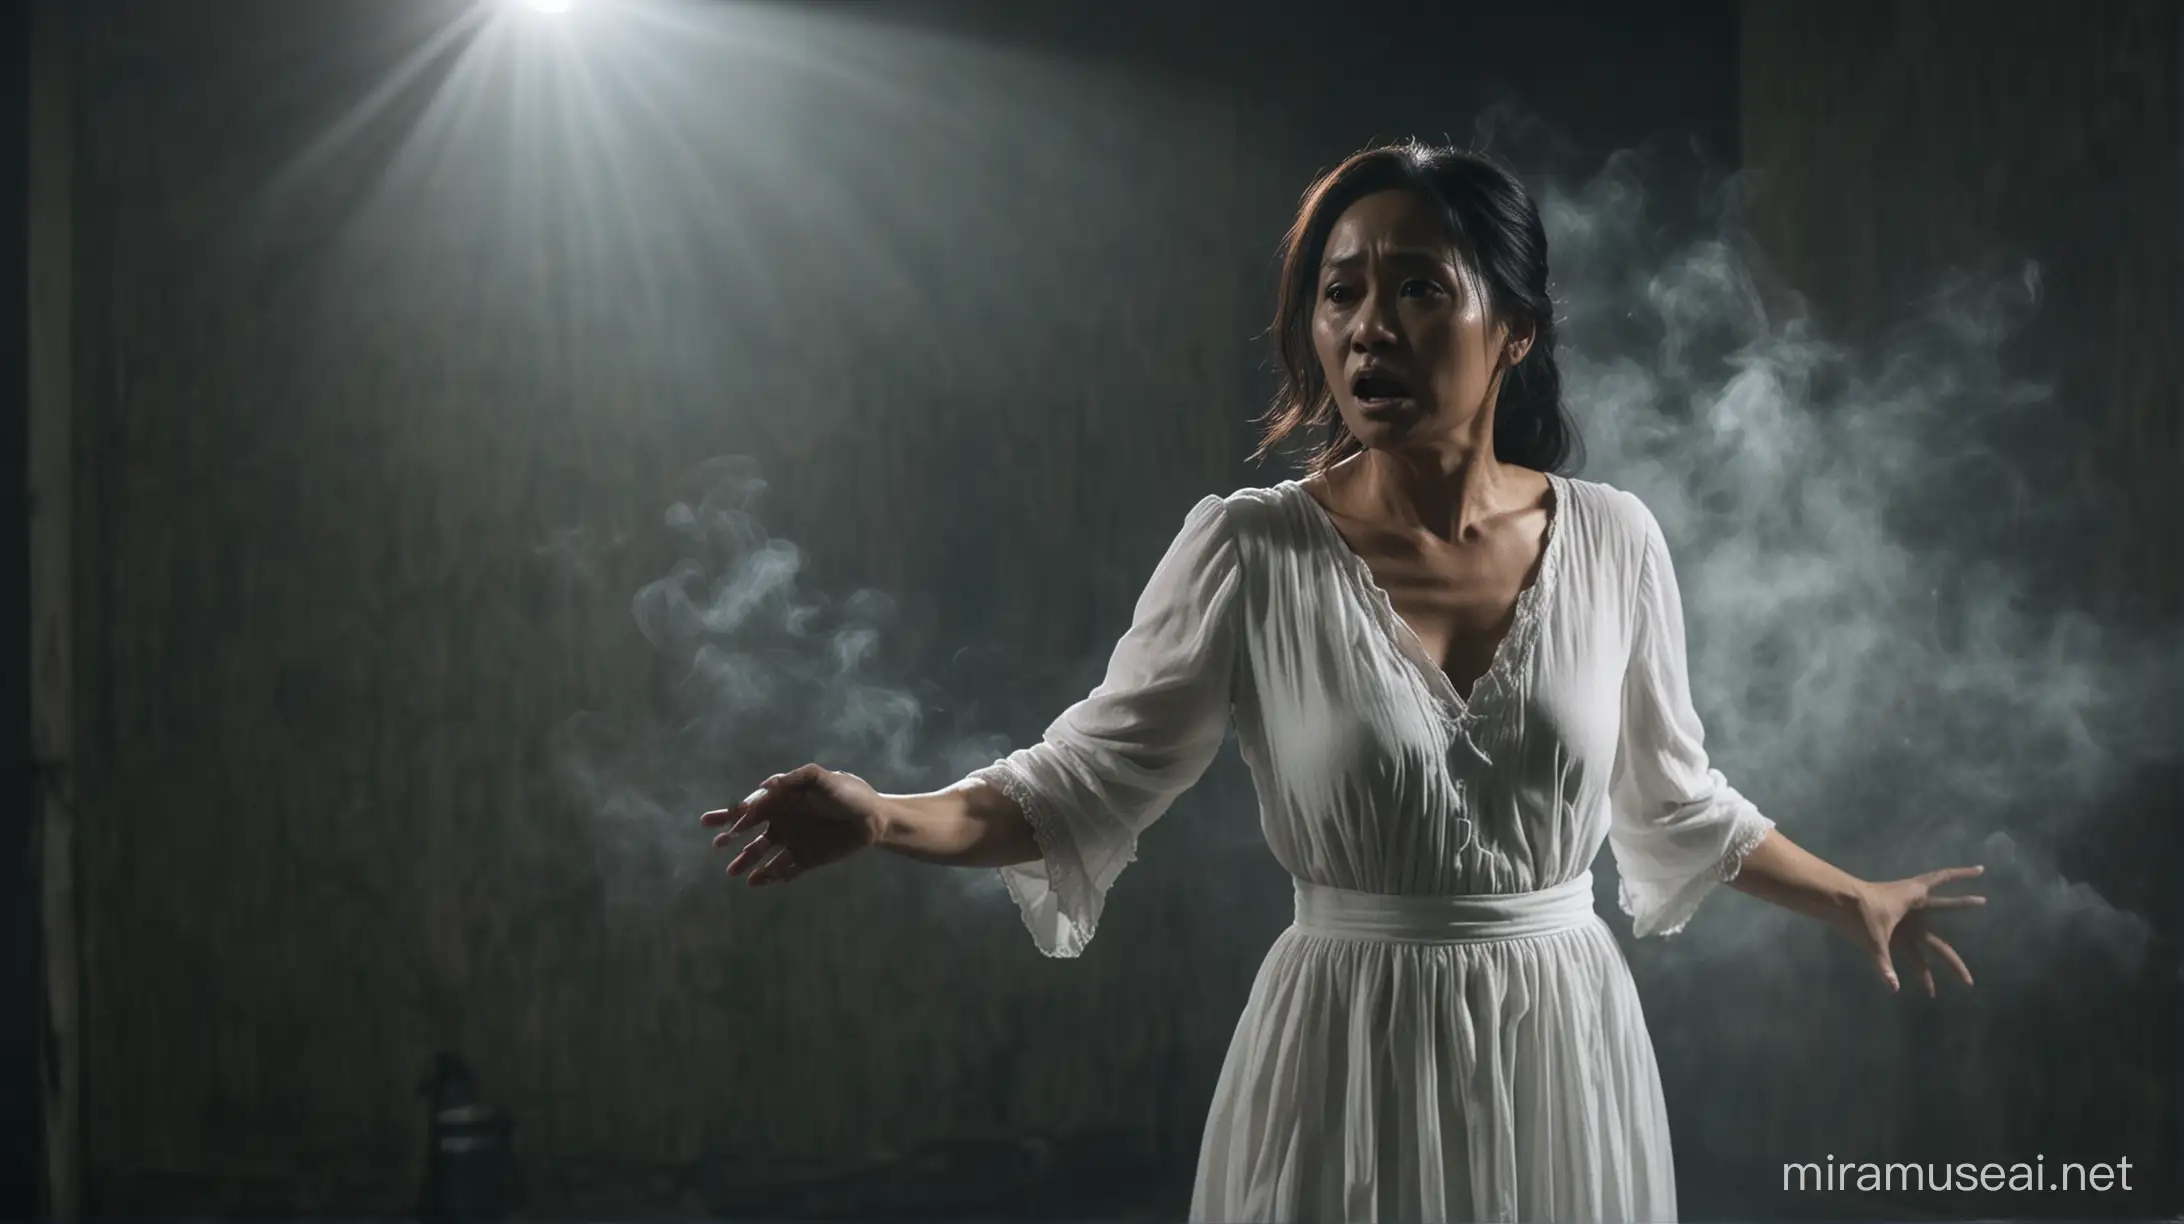 Ghostly and smoky apparition of a 48-year-old Filipino woman with a stab wound in the chest, she wears a white dress and was pointing at something in a dark room, horror, cinematic